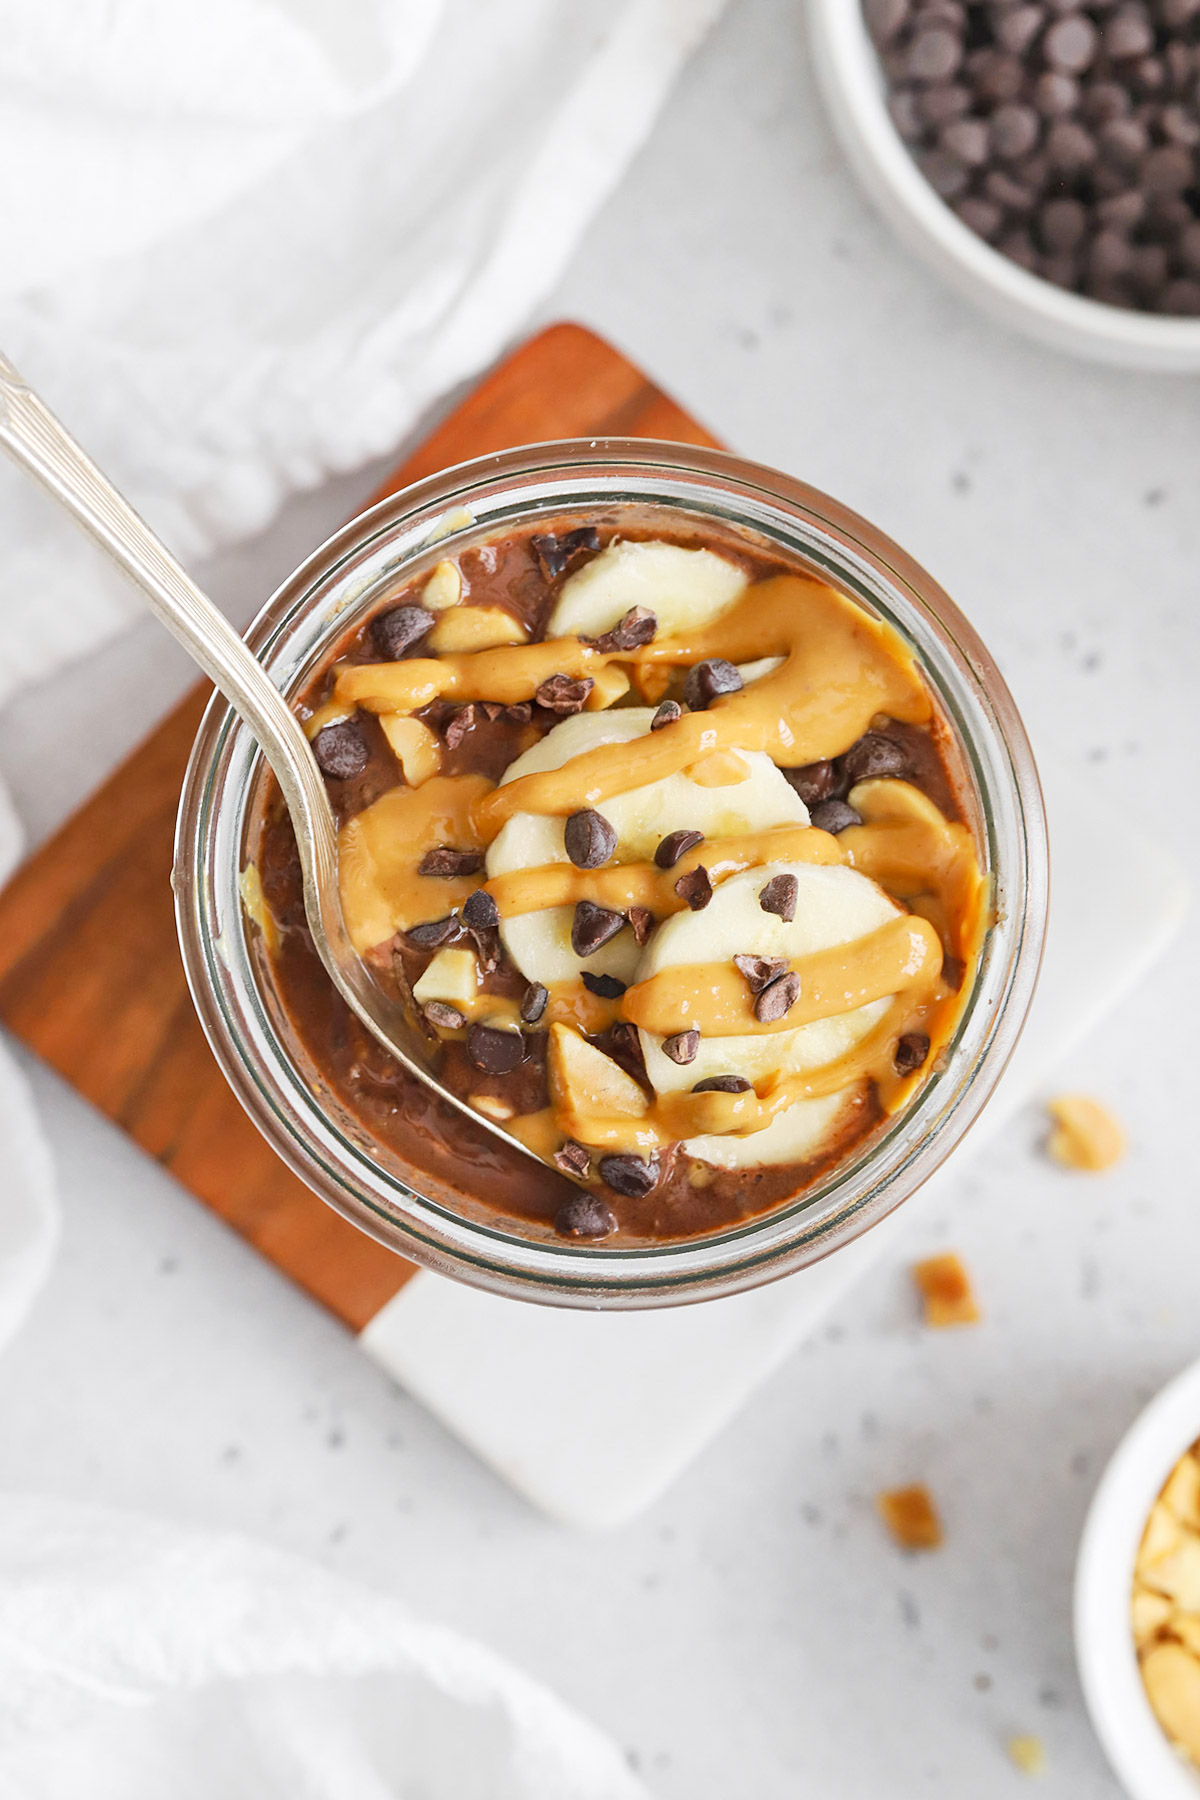 Overhead view of vegan chocolate peanut butter overnight oats drizzled with peanut butter and topped with banana slices and cacao nibs